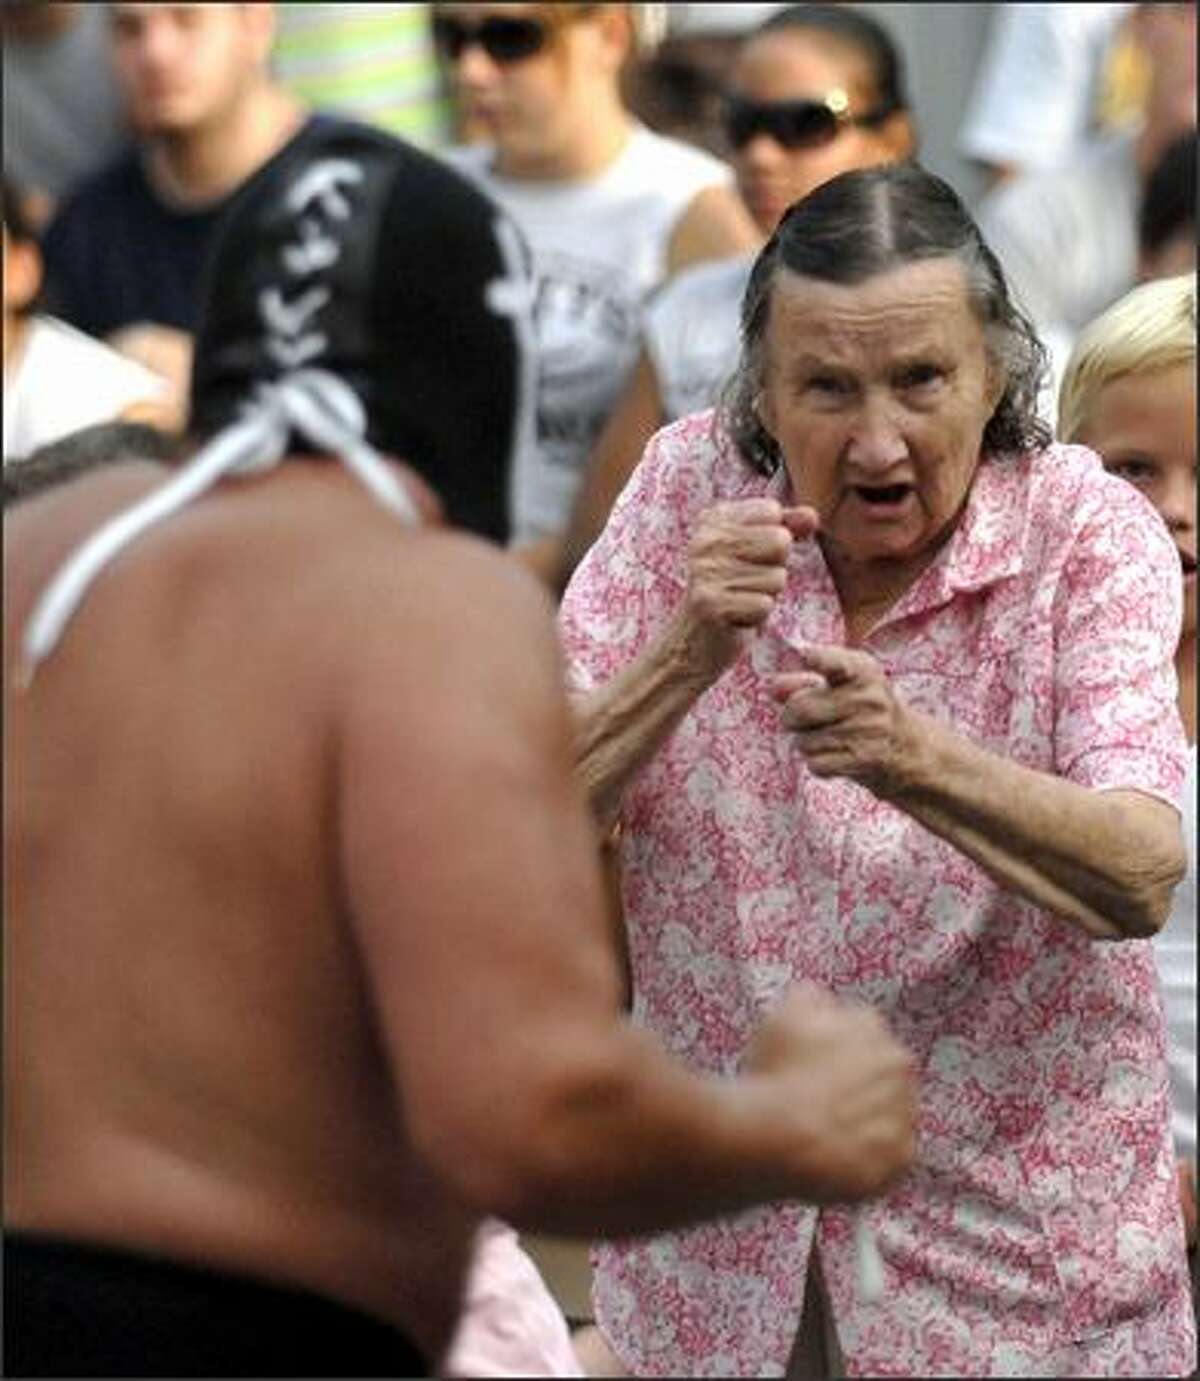 Dorothy Brown, 90, right, prepares to fight the professional wrestler called the "Sheek of Arabi" Wednesday, Aug. 8, 2007, as she gets carried away by the professional wrestling action at the Champaign County Fair in Urbana, Ohio. Photo/Springfield News-Sun, Bill Lackey